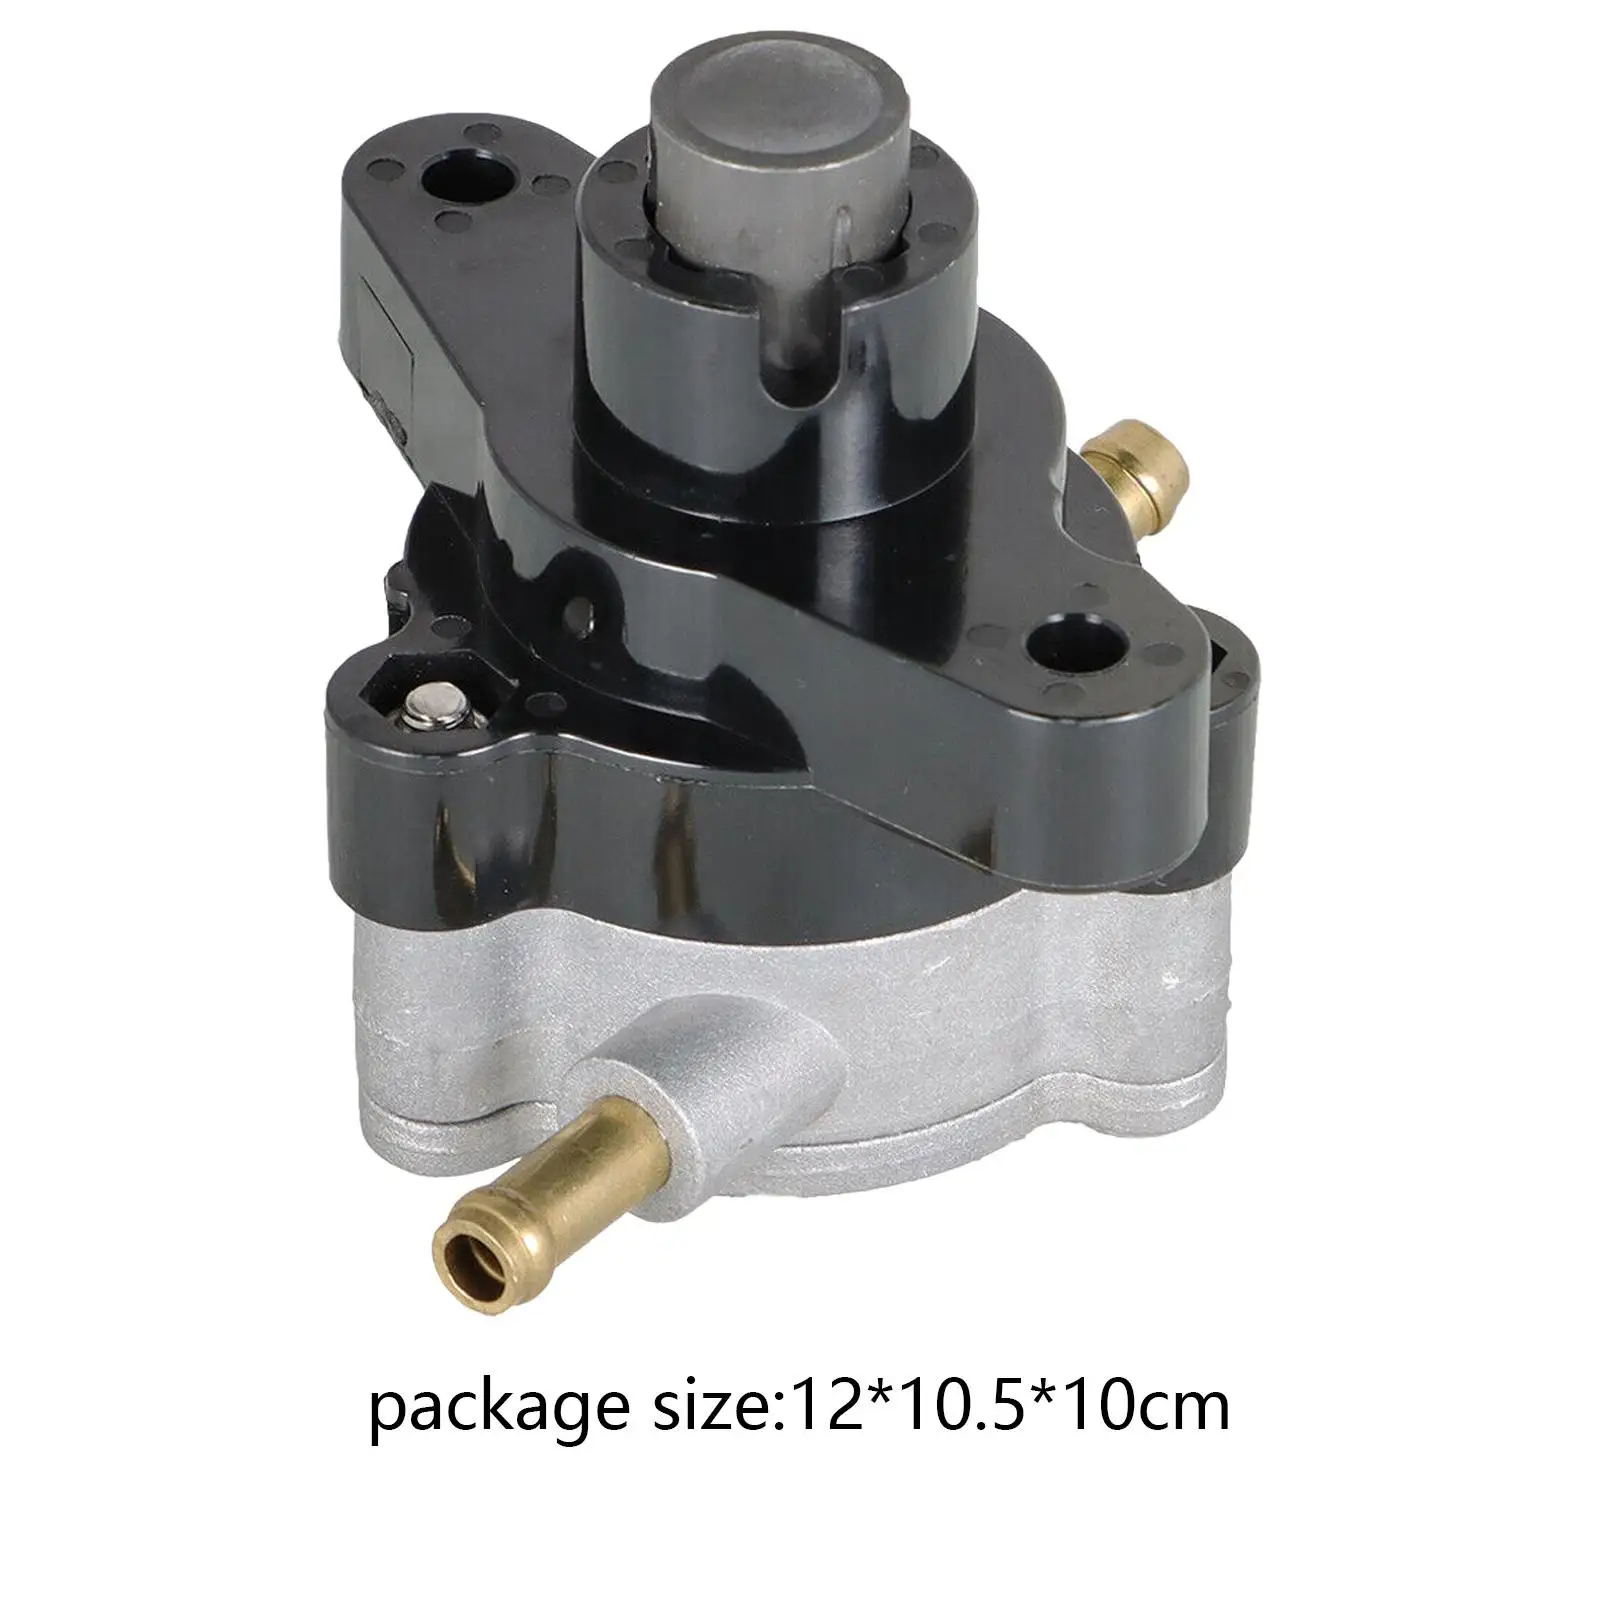 Fuel Pump Replacement Part High Performance Easy to Install 6D8-24410-00-00 880980A02 for Yamaha 2000 F75 F80 F90 F100 F115